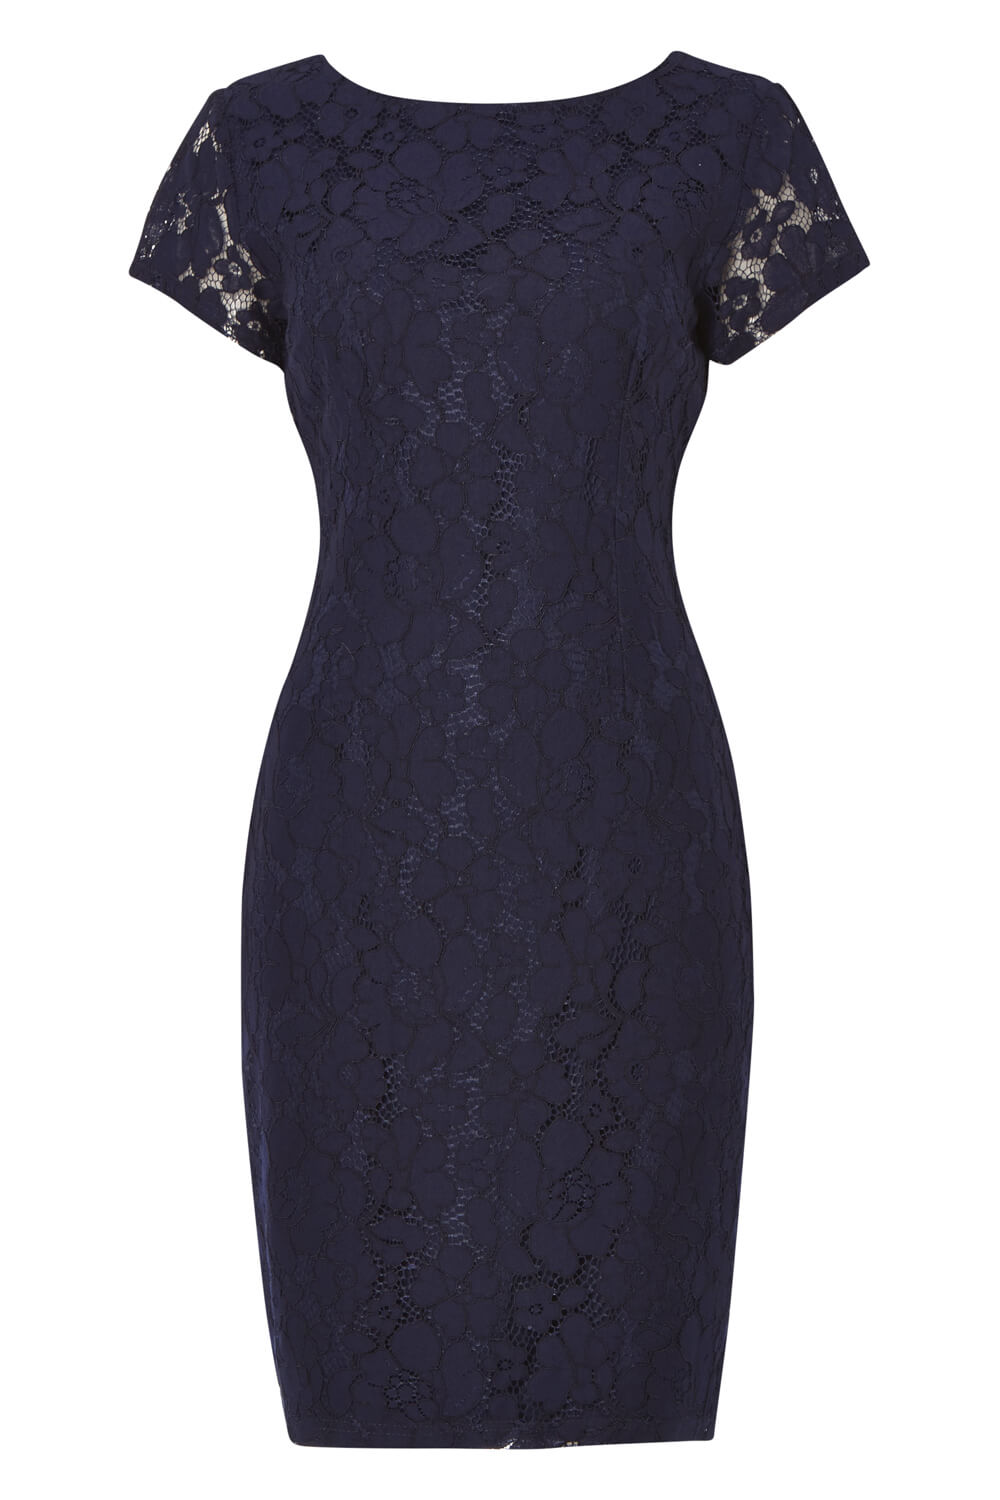 Navy  Short Sleeves Lace Dress, Image 4 of 4